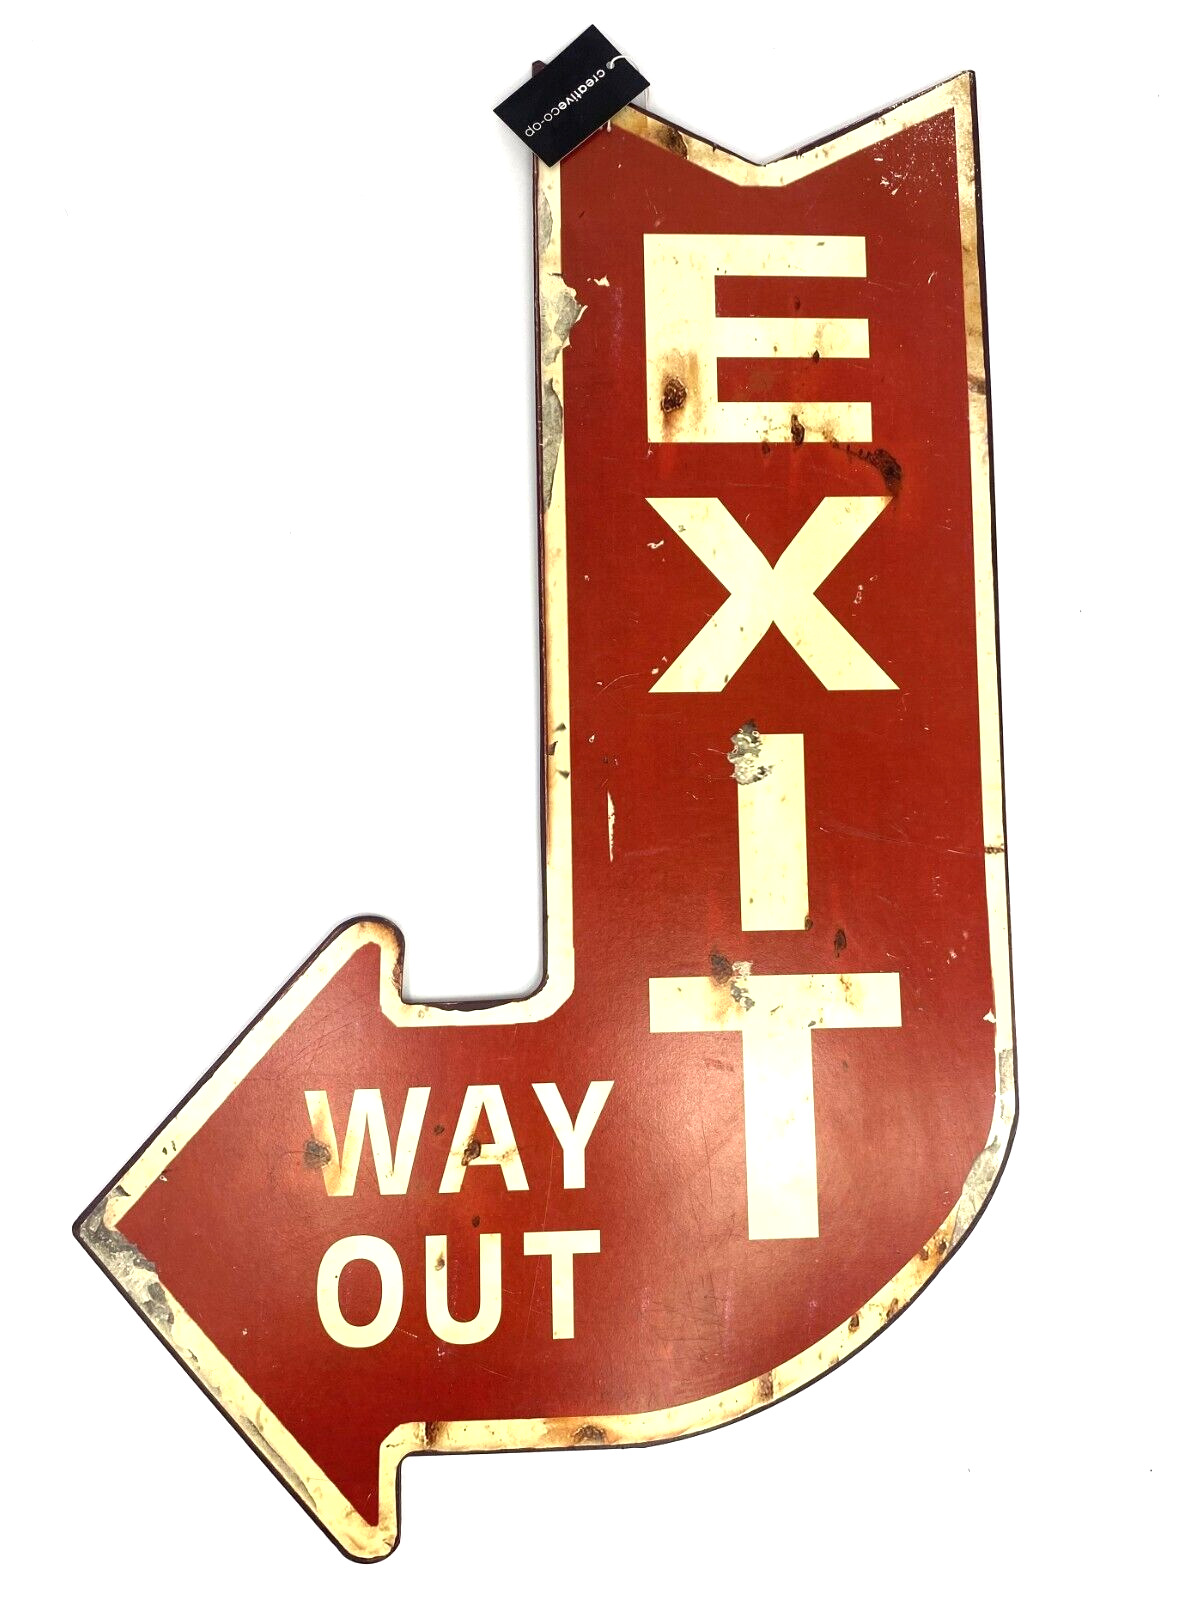 Large Red EXIT WAY OUT Metal Arrow Sign Bar/Home Theater Wall Decor Vintage Rep